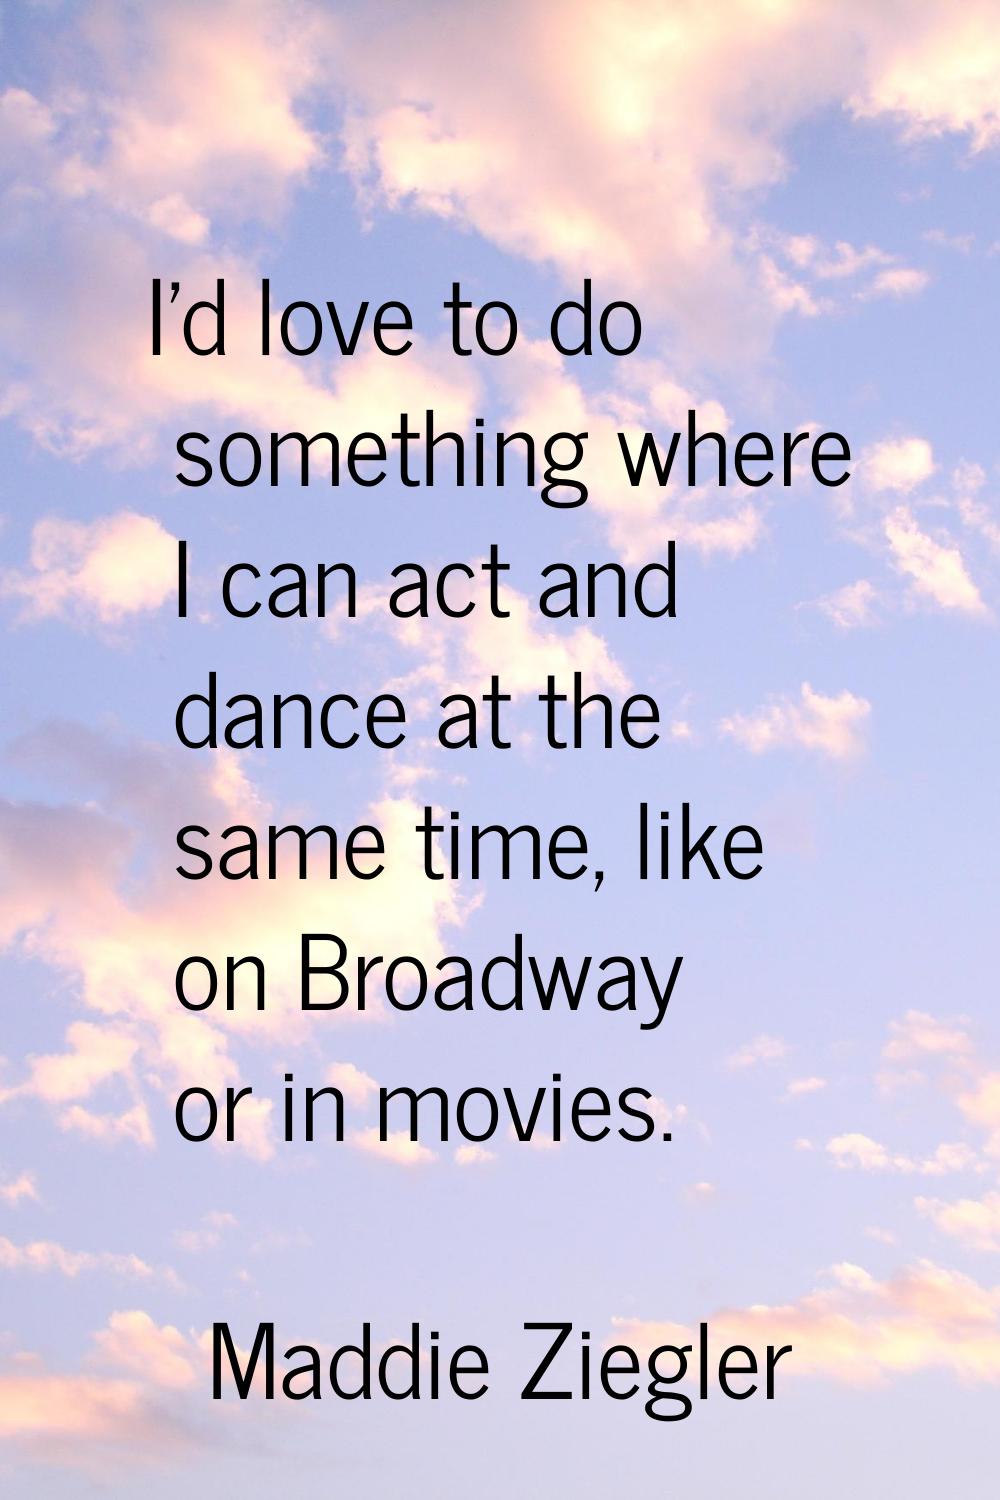 I'd love to do something where I can act and dance at the same time, like on Broadway or in movies.